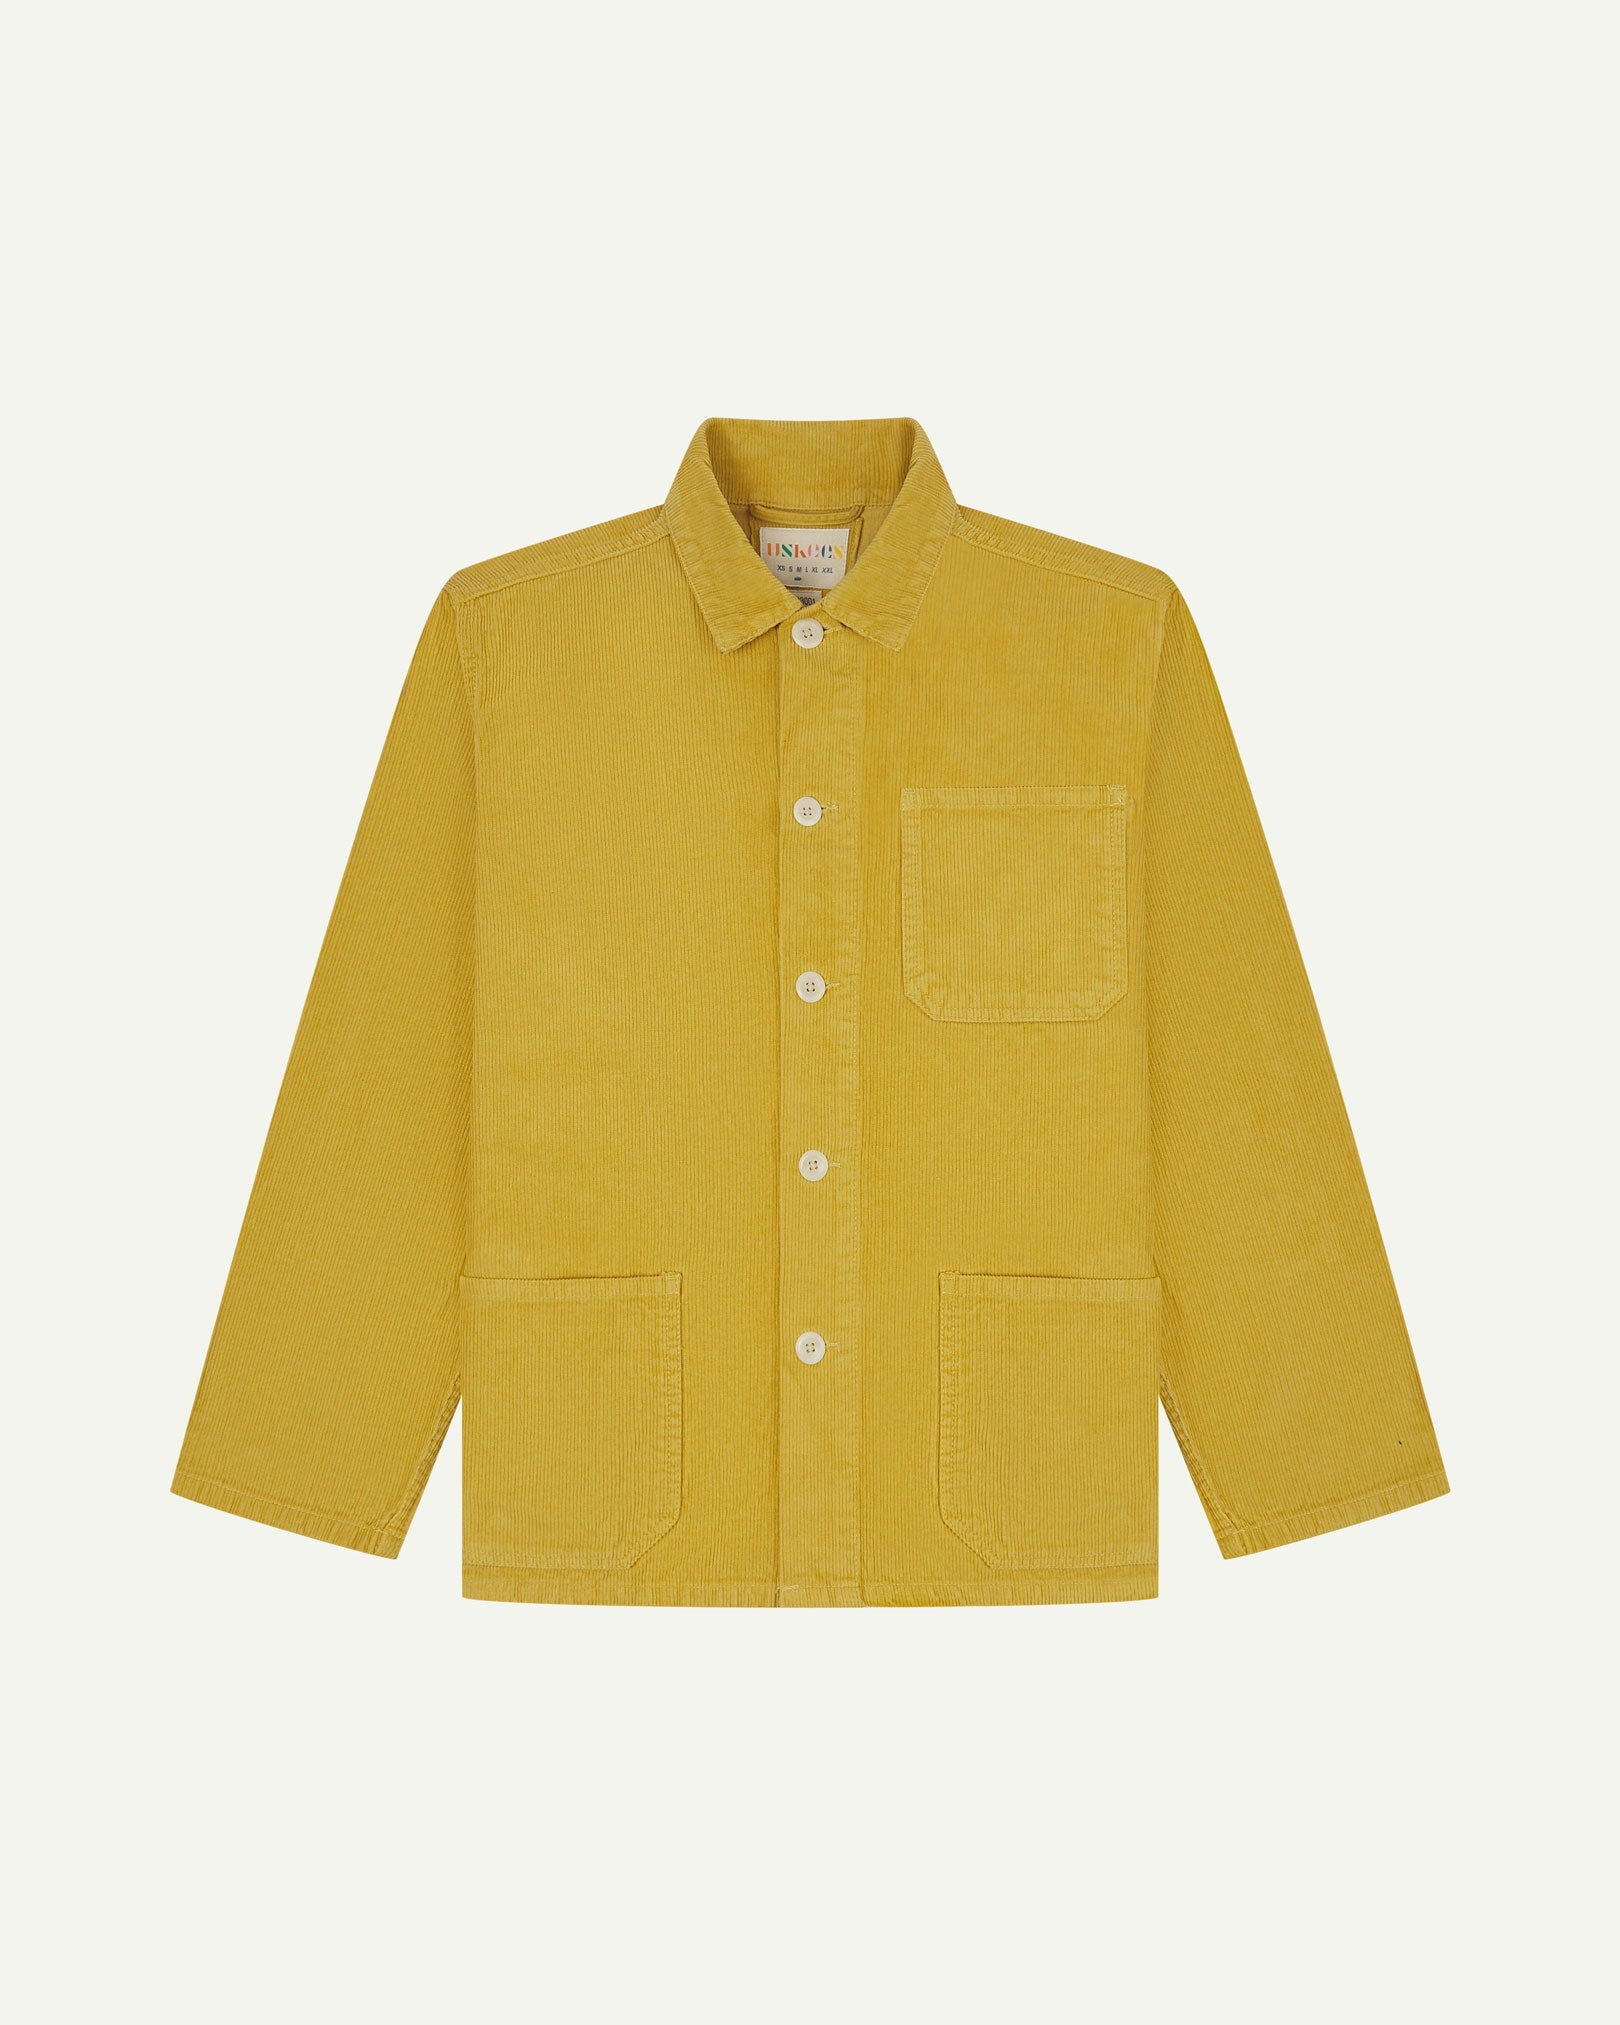 Front flat shot of yellow (citronella), buttoned corduroy overshirt. Clear view of chest and hip pockets, corozo buttons and Uskees branding label.